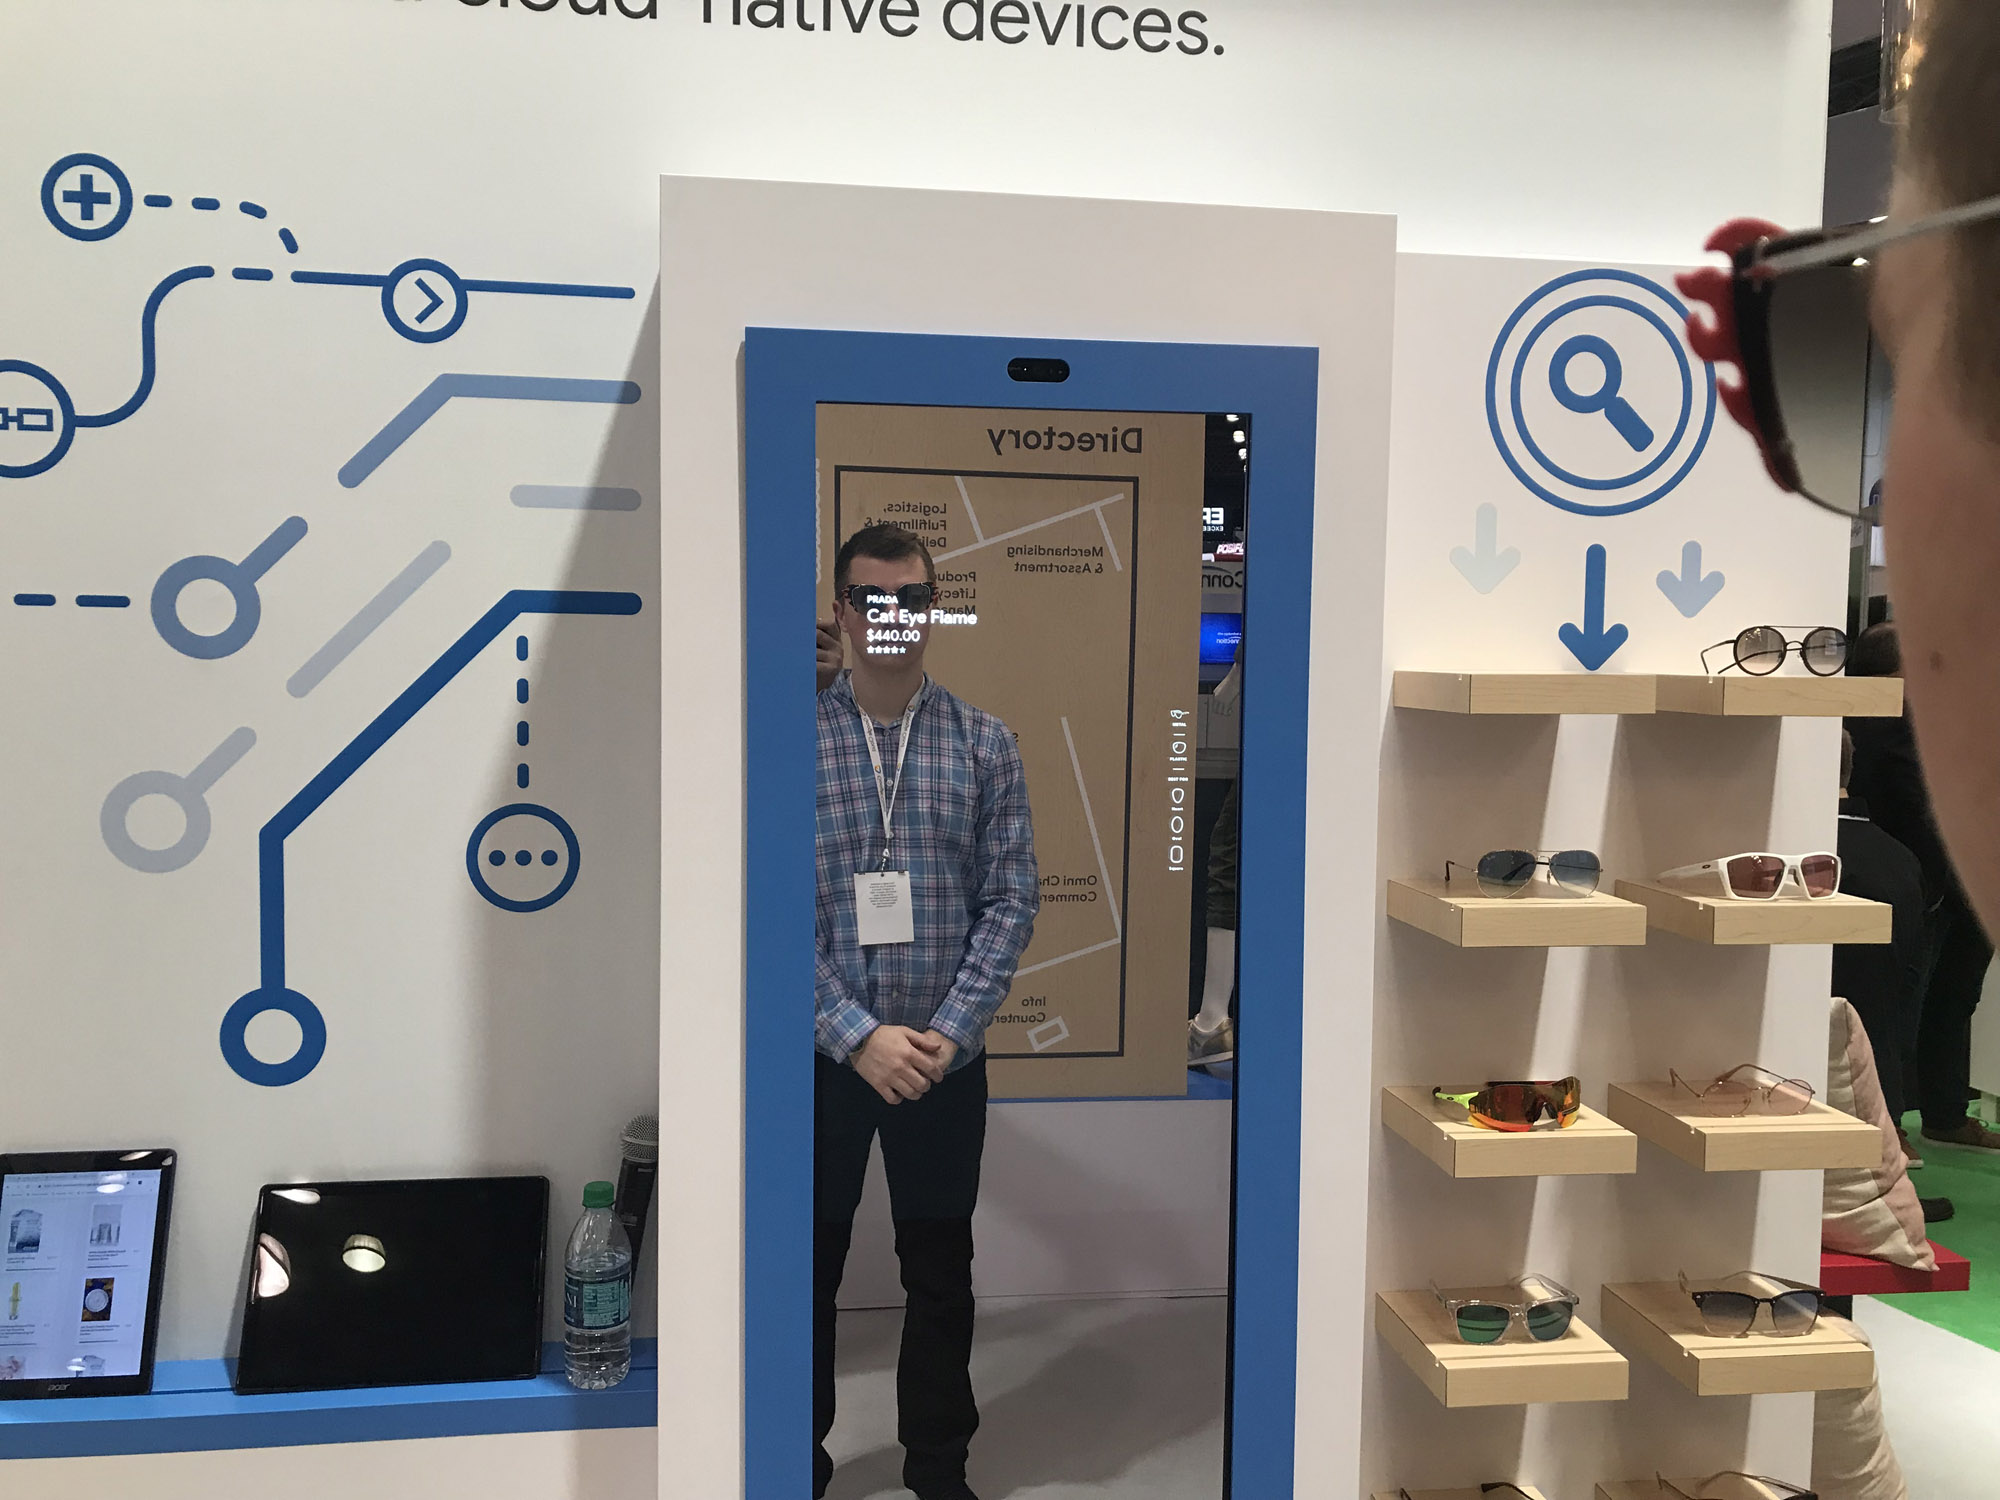 Google at NRF 2019 by Marcus Guttenplan for Sparks